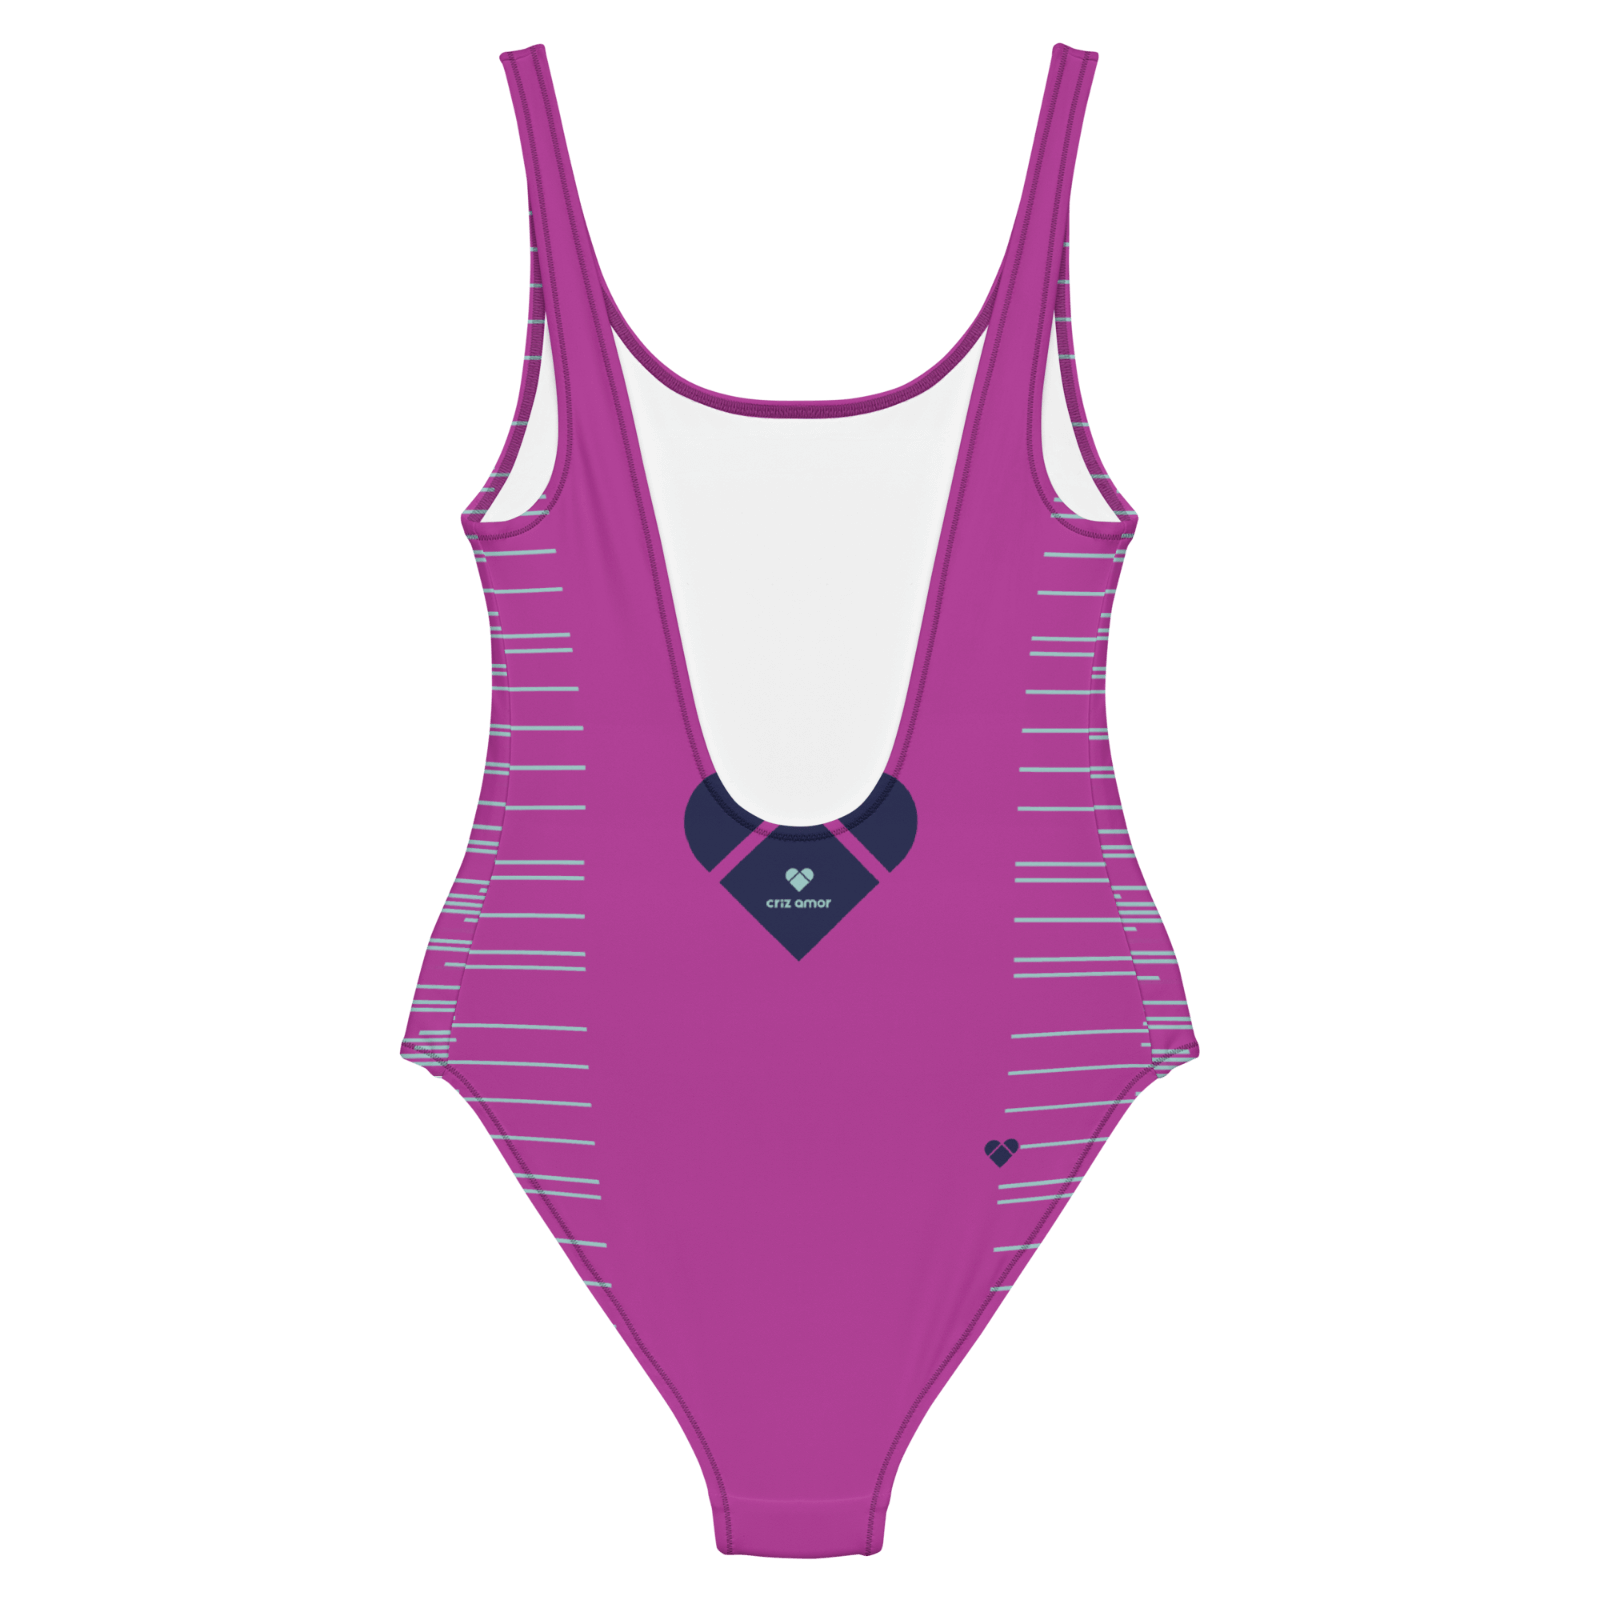 Vibrant Fucsia Pink Dual Swimsuit by CRiZ AMOR